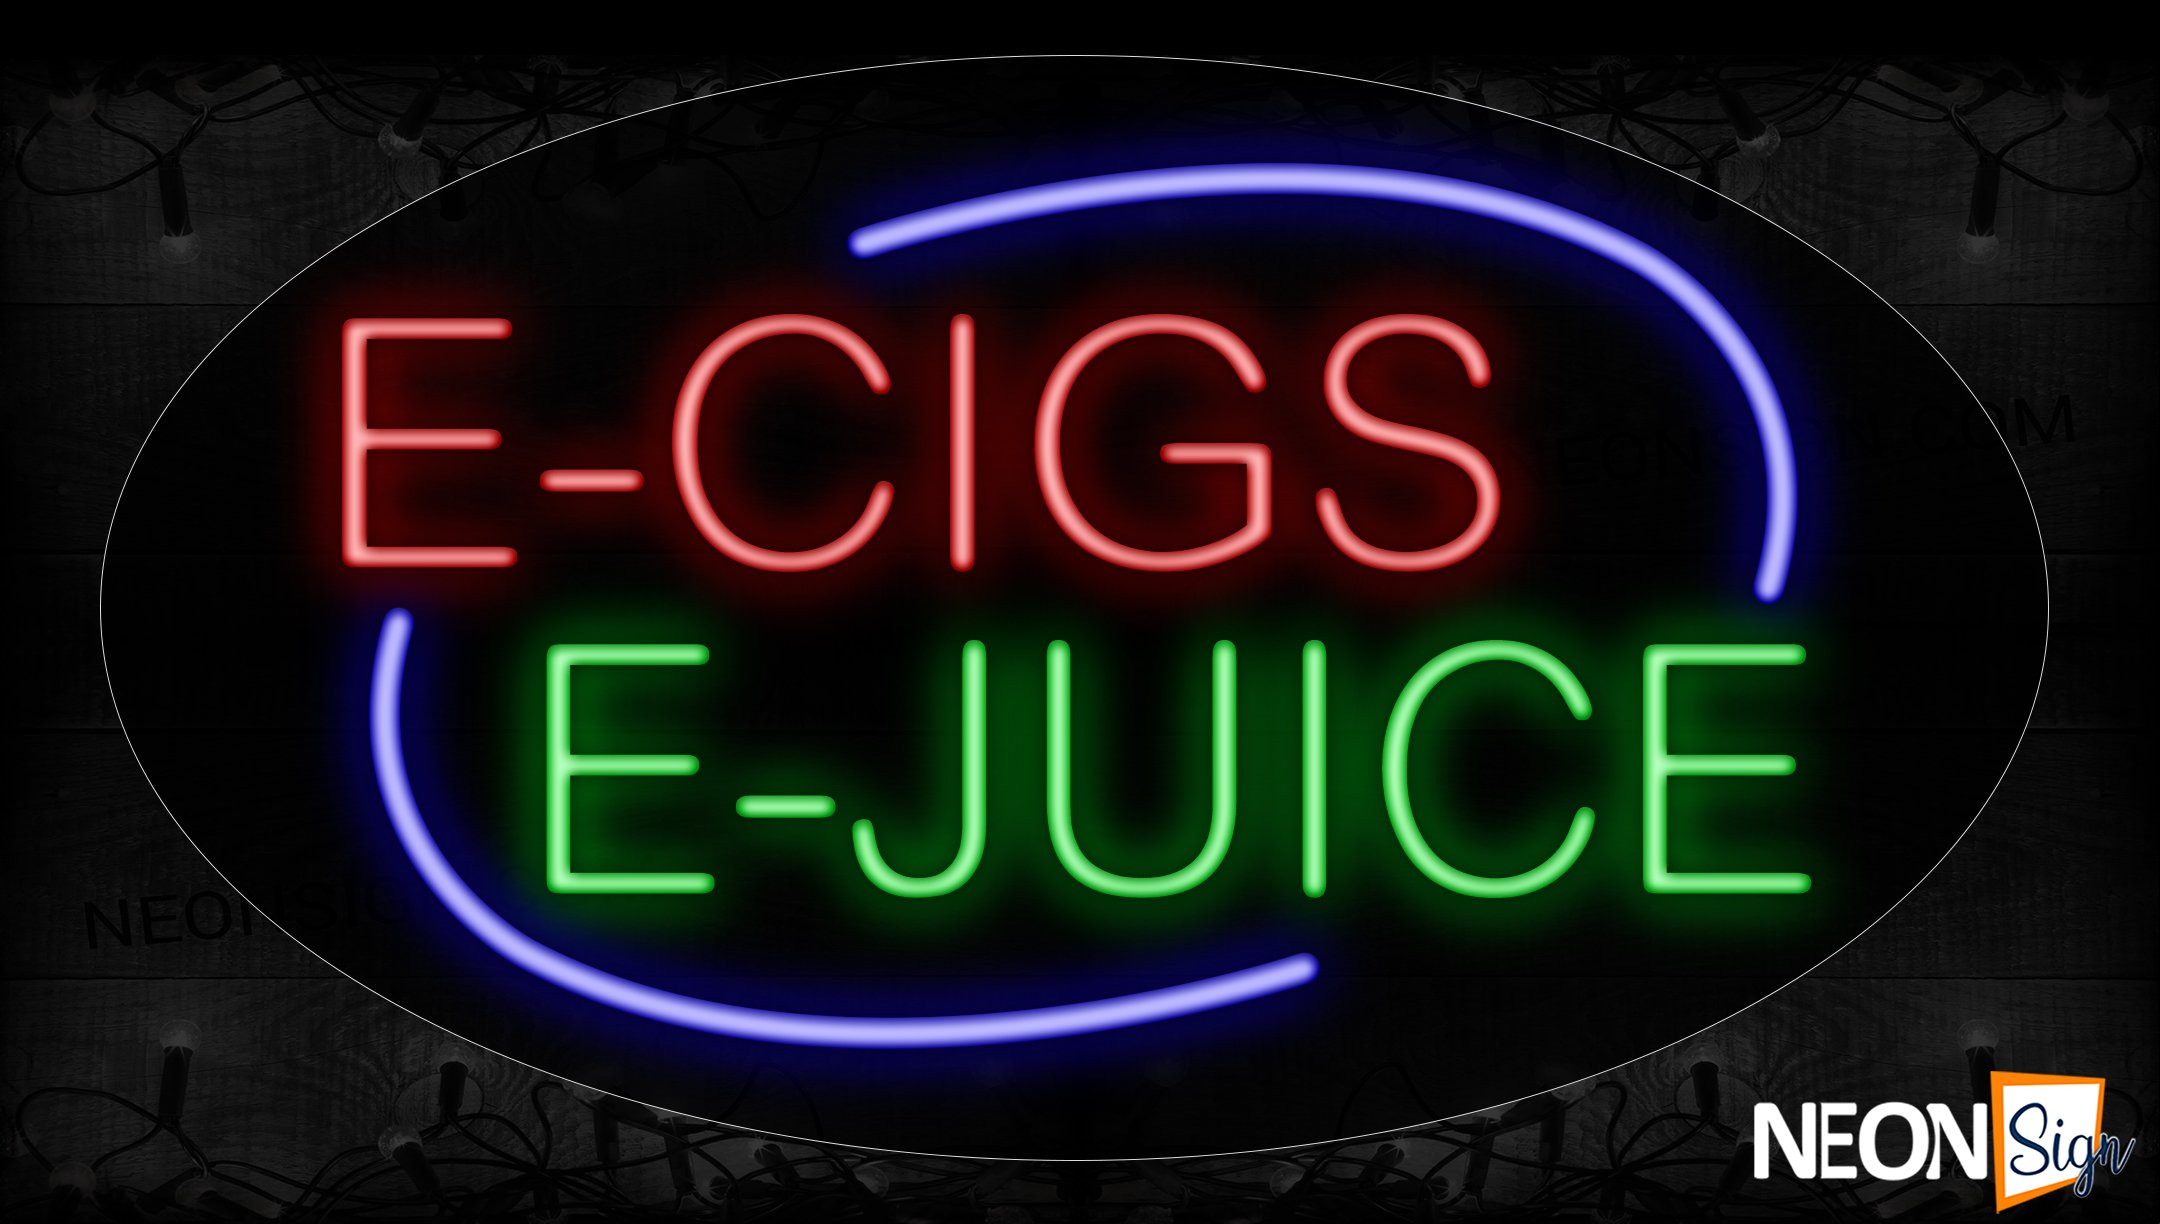 Image of 14620 E-Cigs E-Juice With Arc Border Neon Signs_17x30 Contoured Black Backing